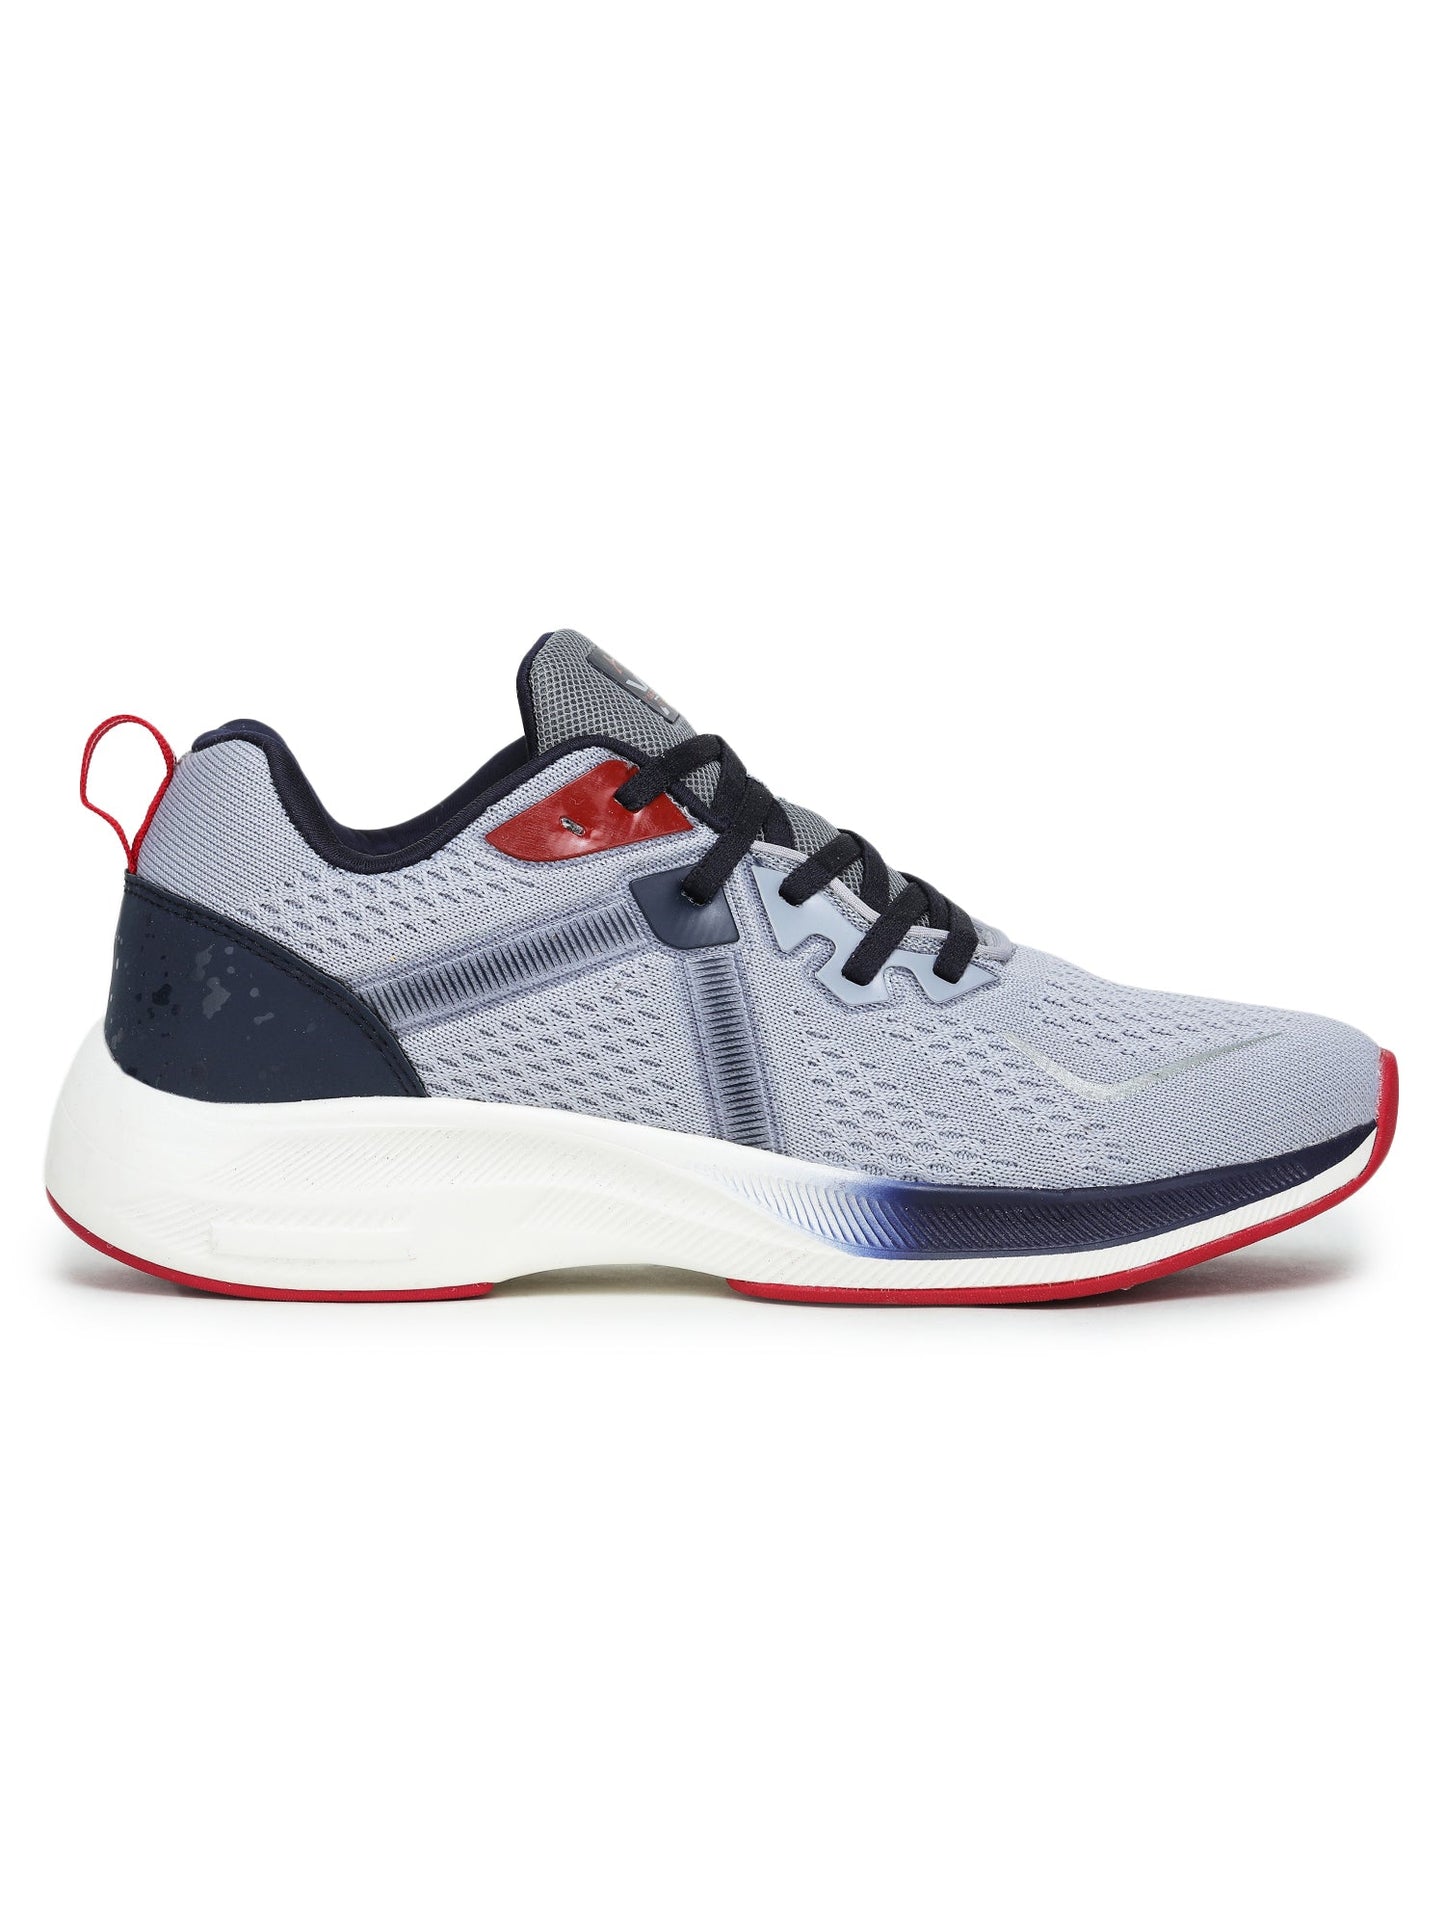 ABROS  SPEED RUNNING SPORTS SHOES FOR MEN